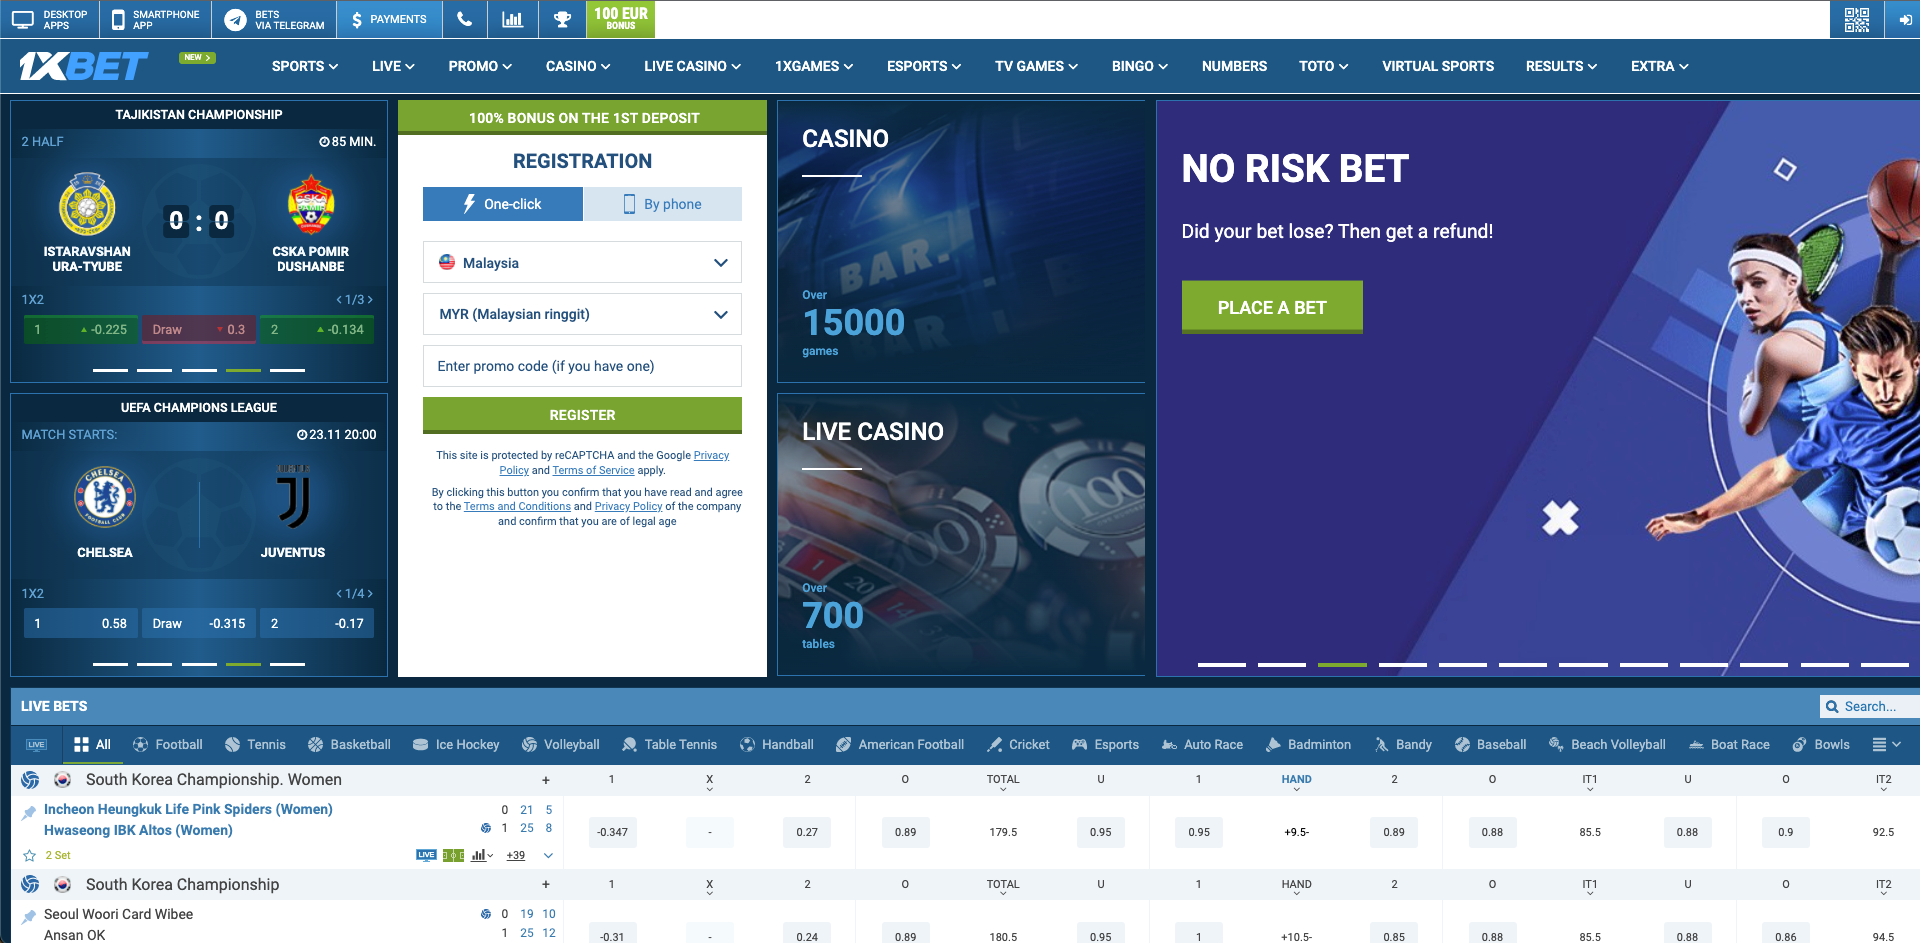 1xbet gambling site Malaysia - registration page scren